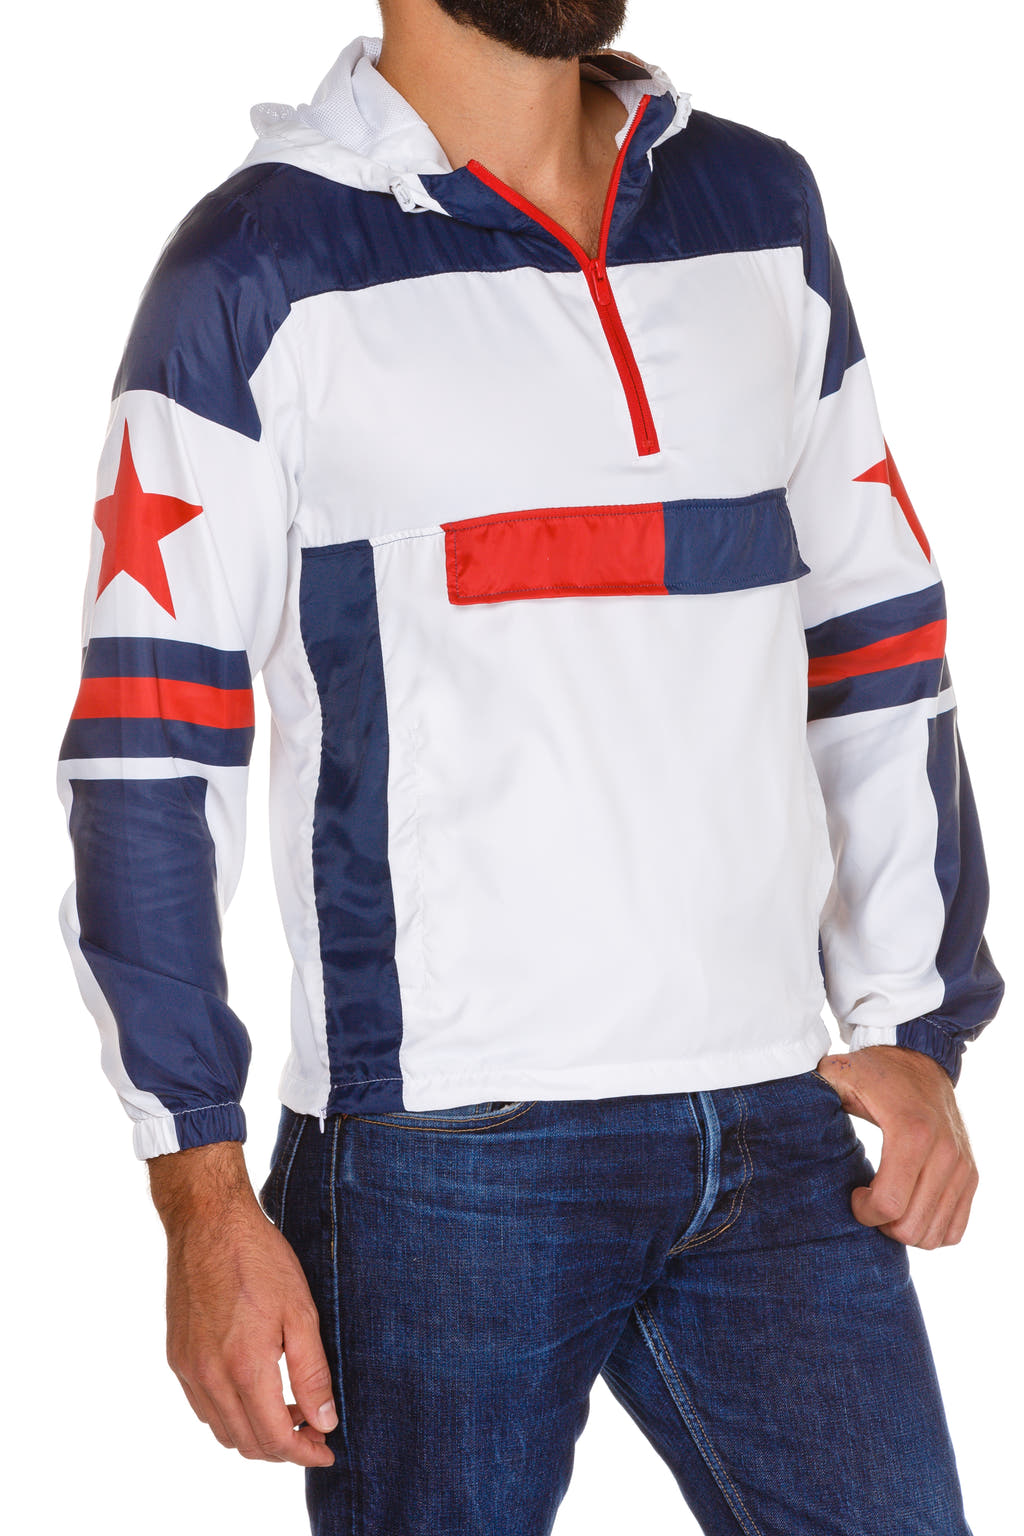 red, white and blue windbreker for men